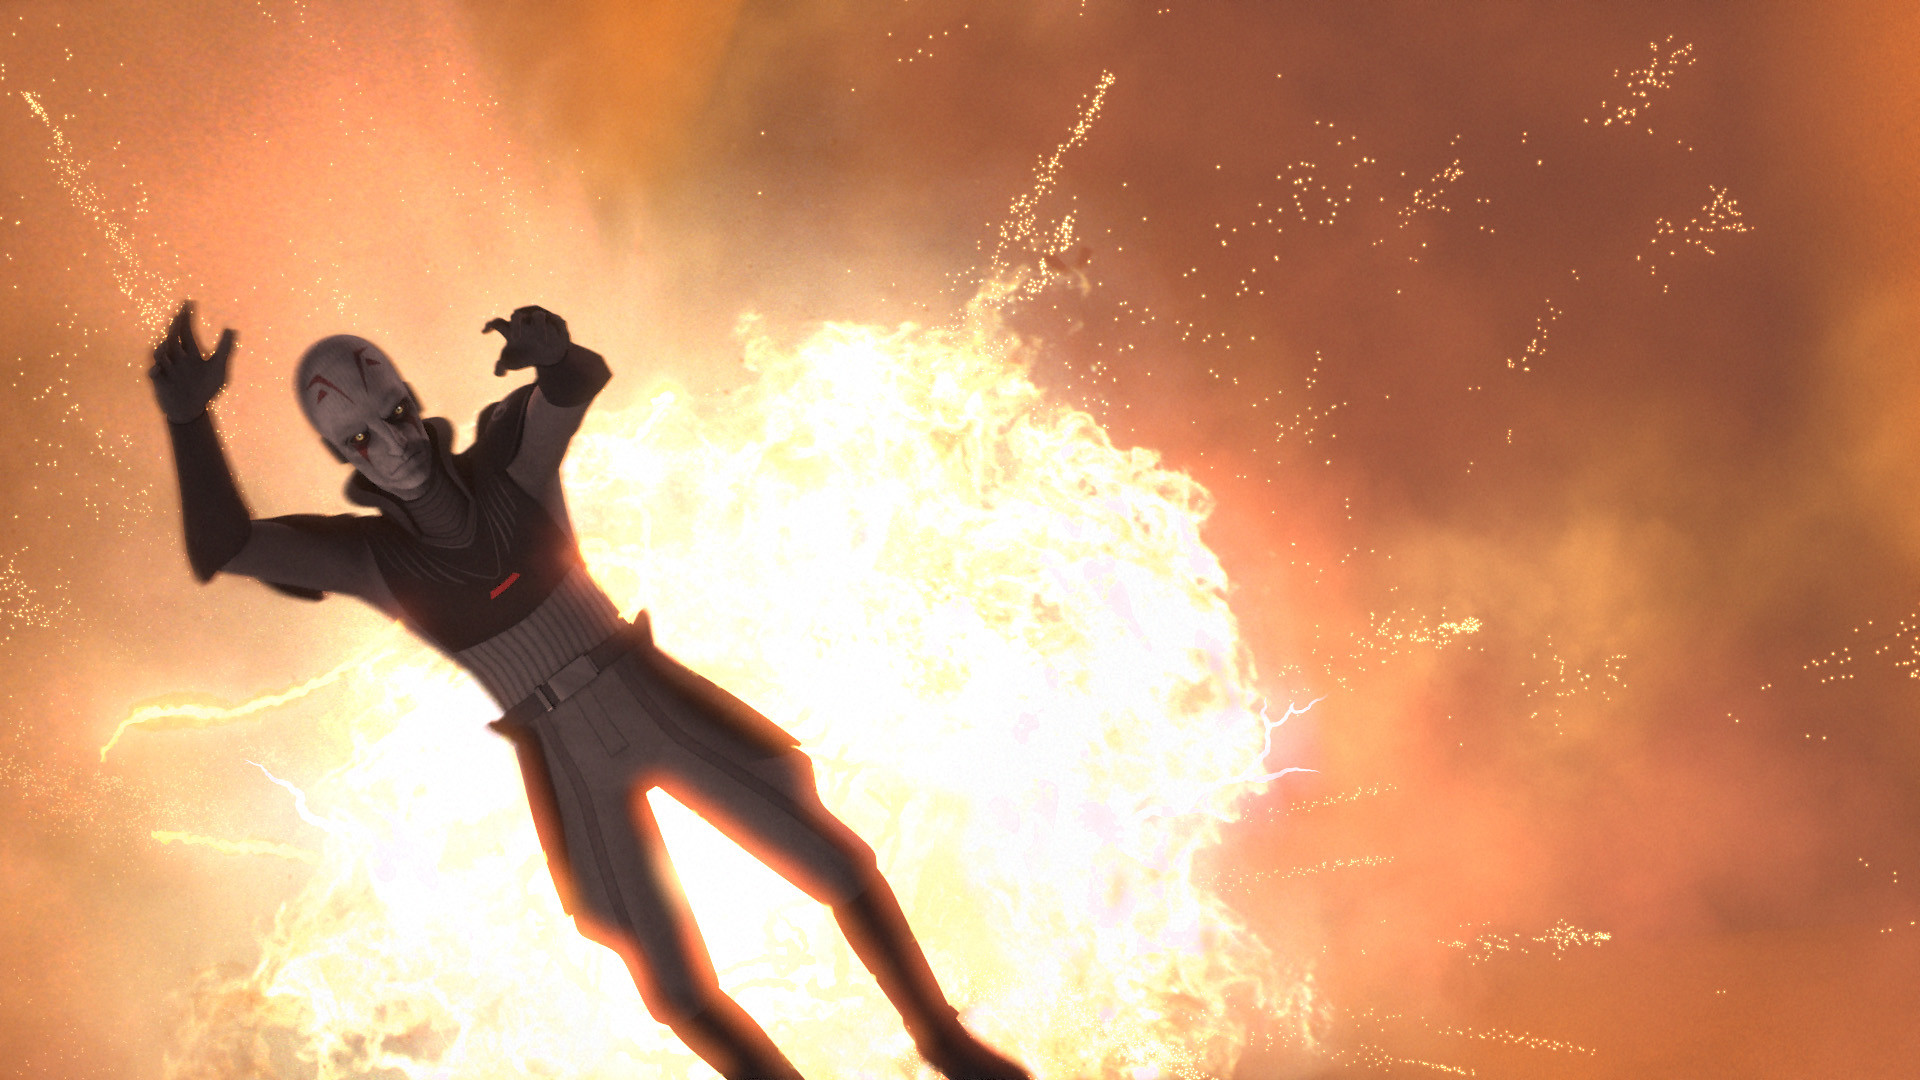 1920x1080 The Inquisitor falls to his death in Star Wars Rebels